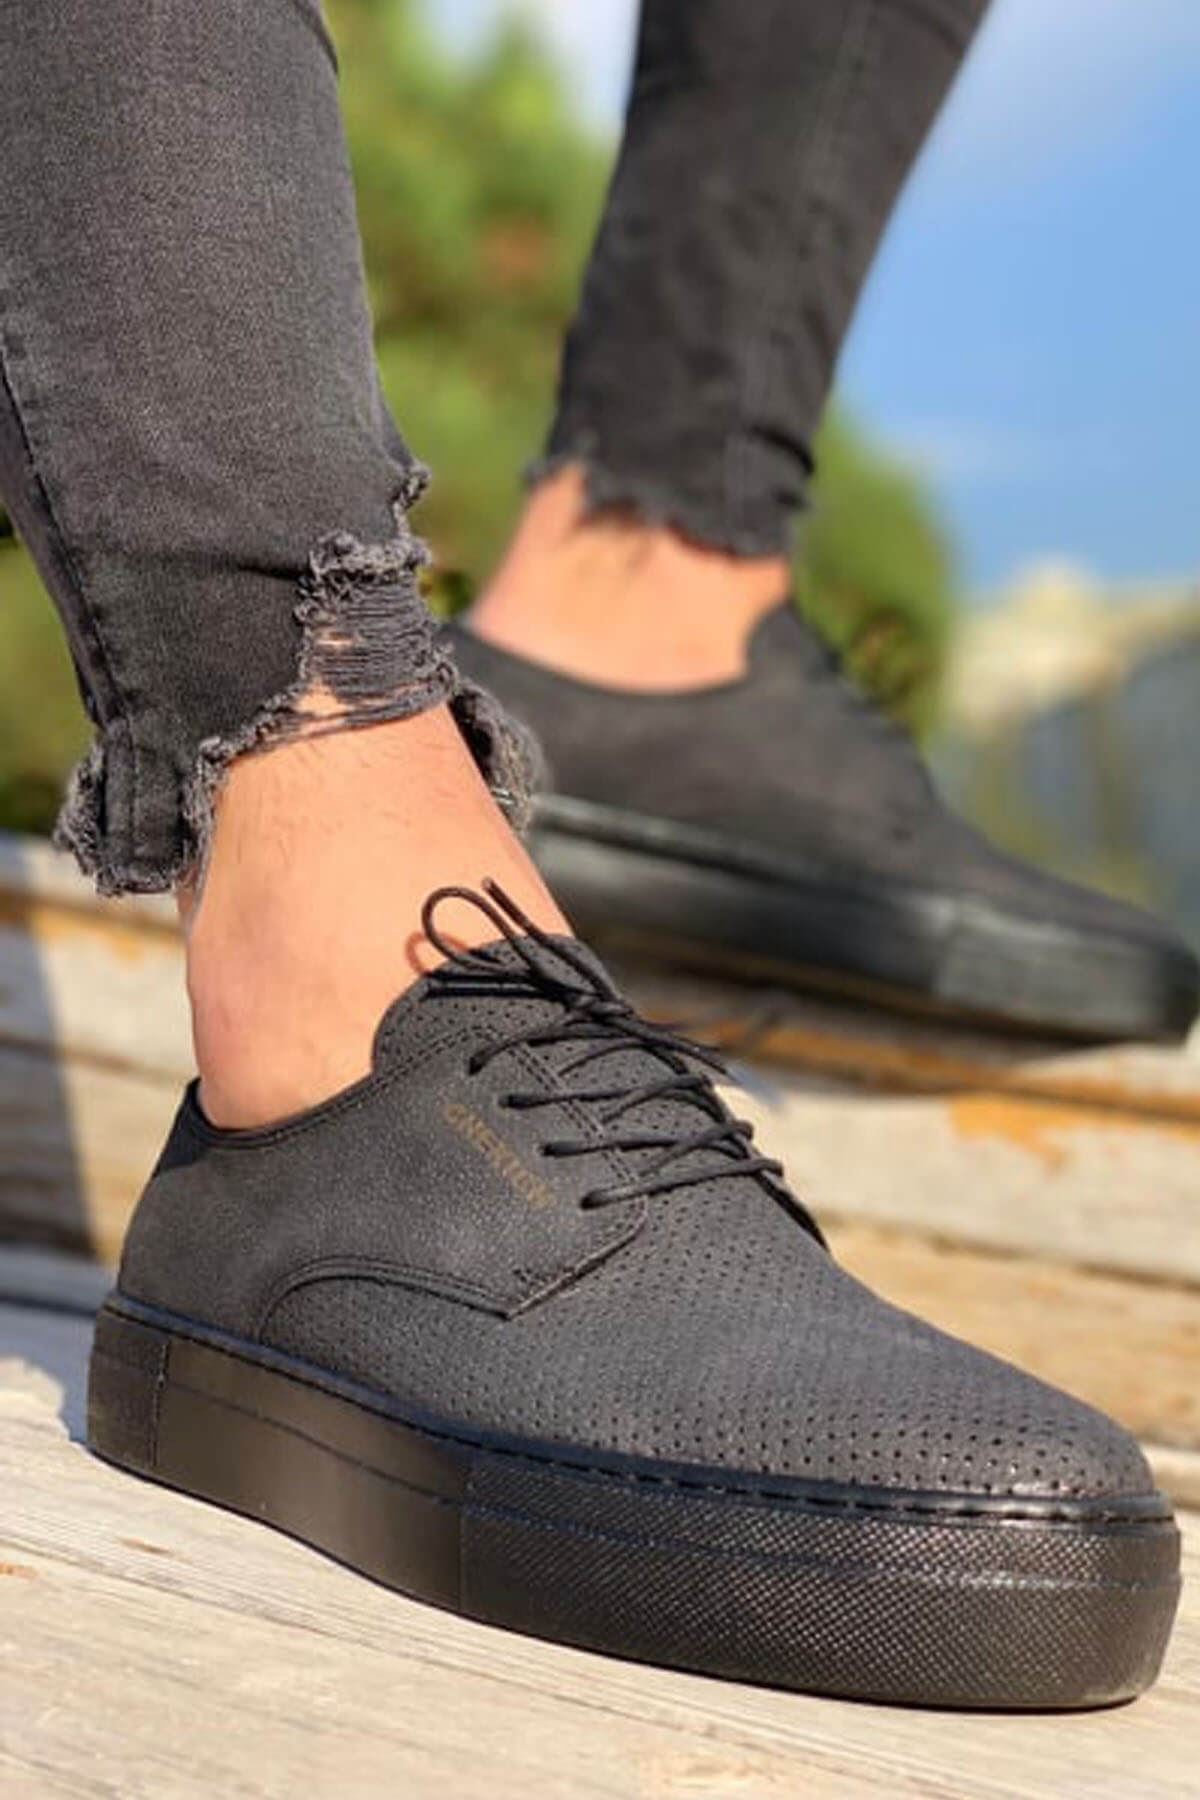 CH061 Men's Full Black Lace-up Casual Sneaker Sports Shoes - STREETMODE ™